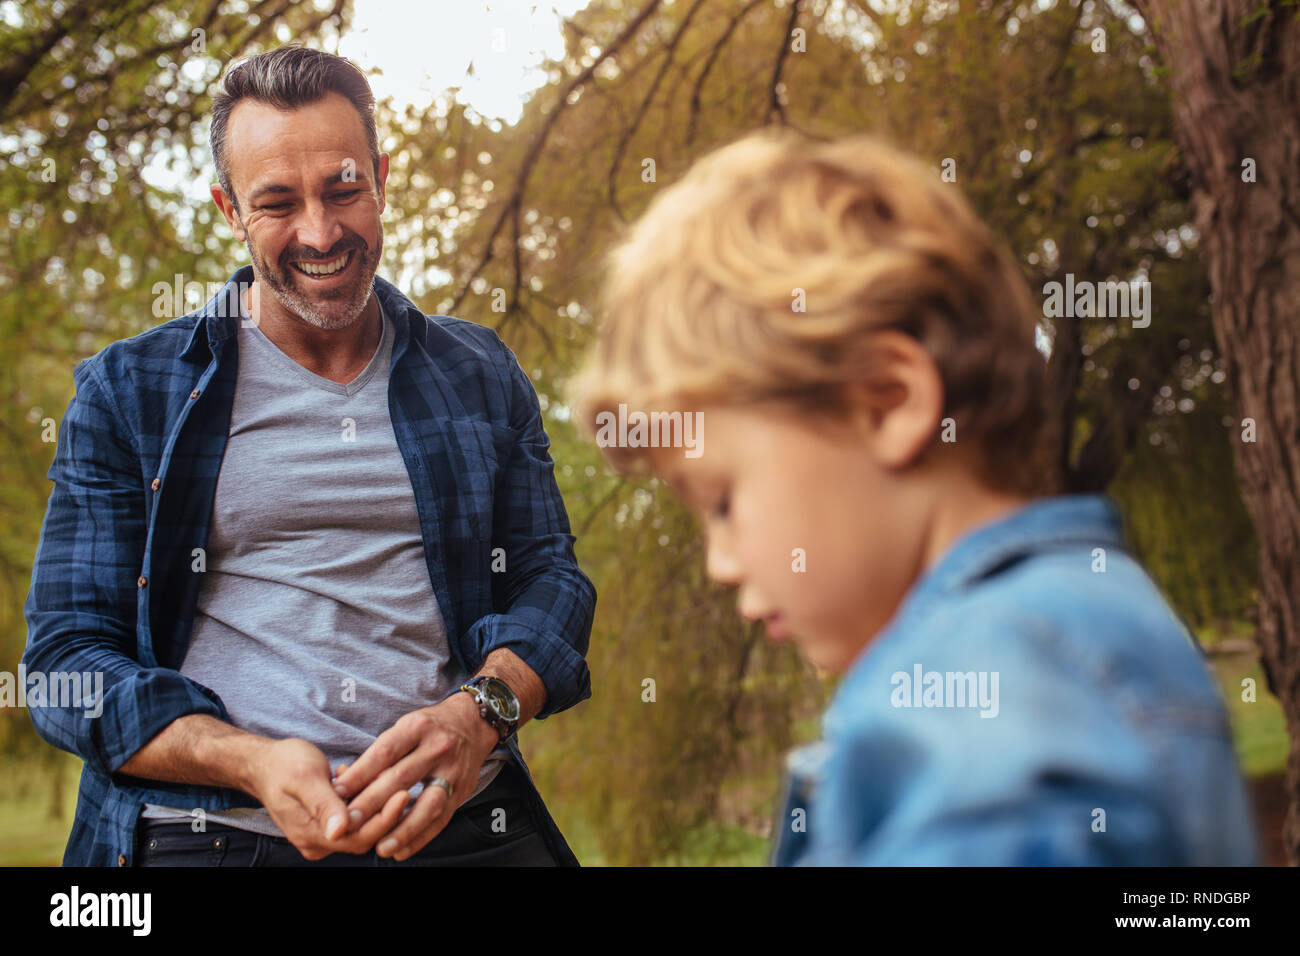 Mature man looking at a little boy in front and smiling at park. Happy father and son at the park. Stock Photo